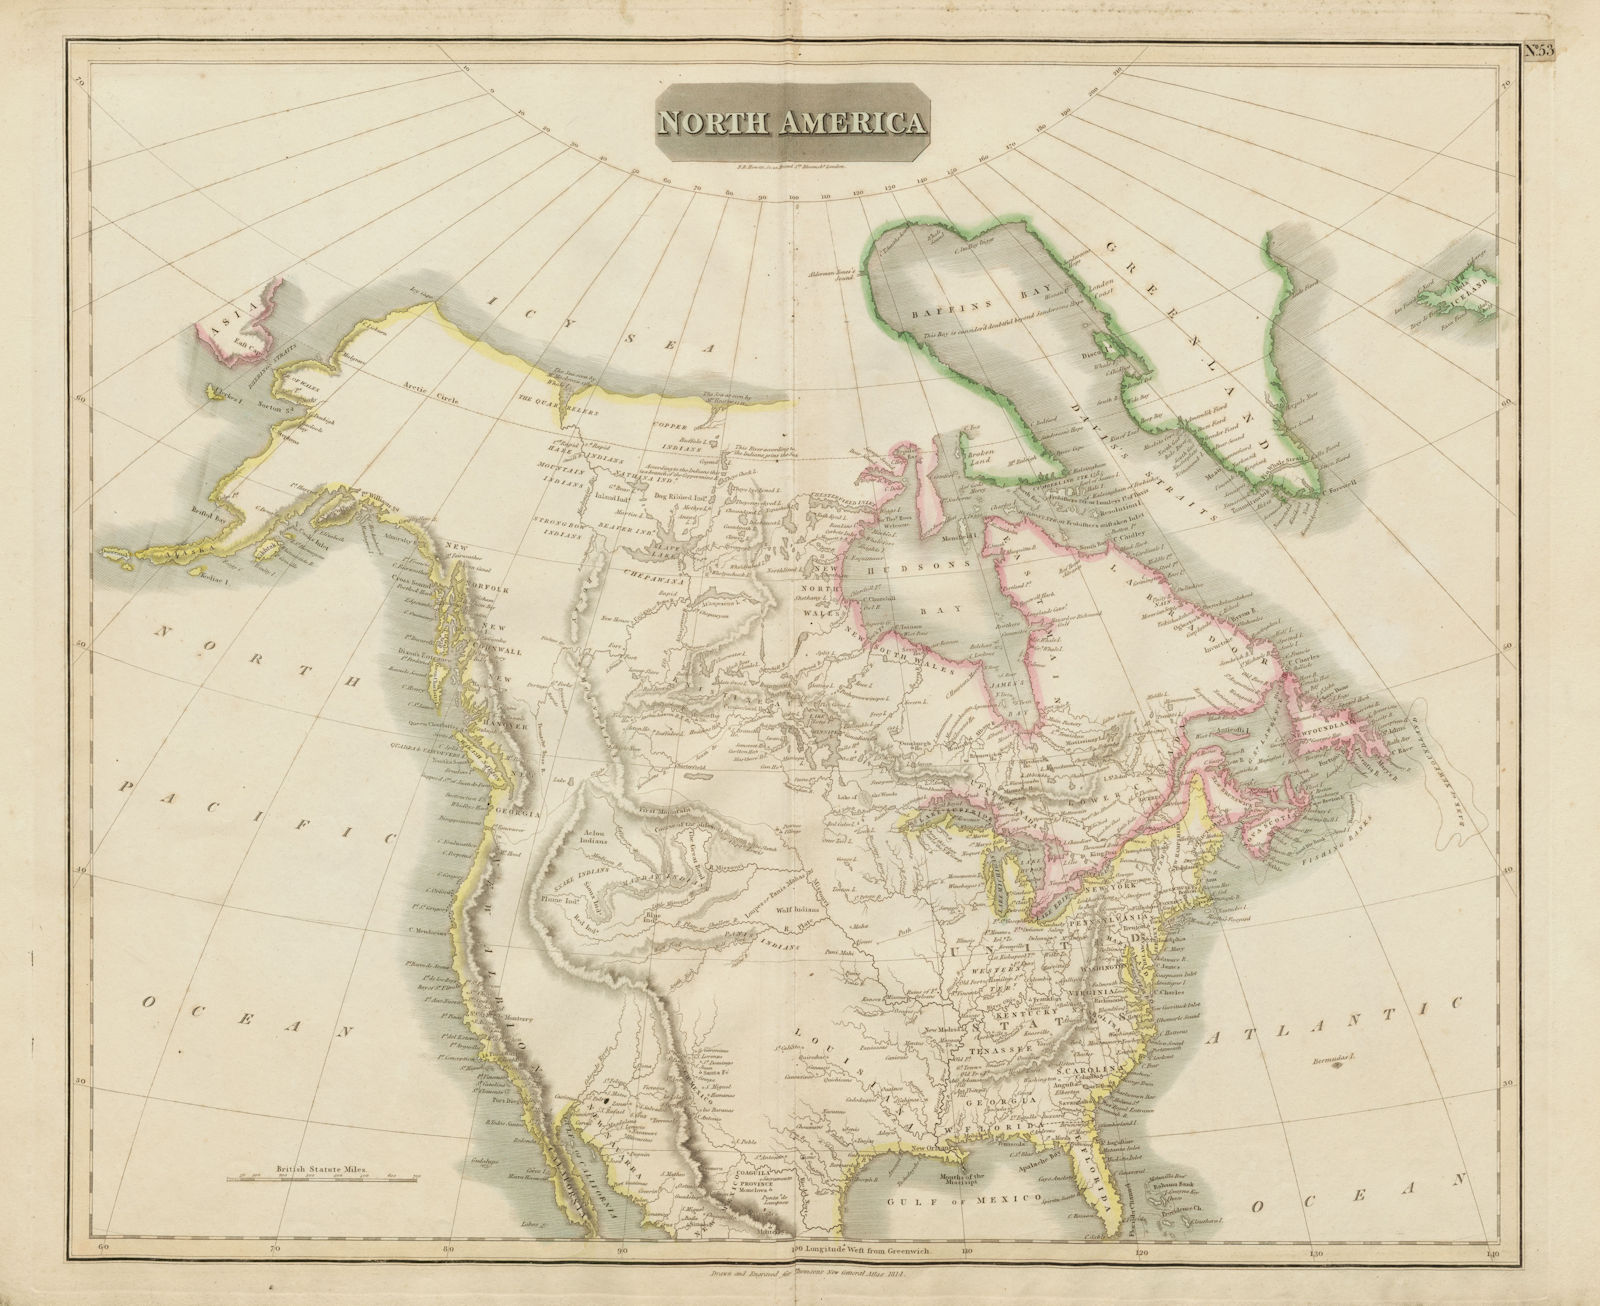 "North America" by John Thomson. Missions, Forts & Indian settlements 1817 map